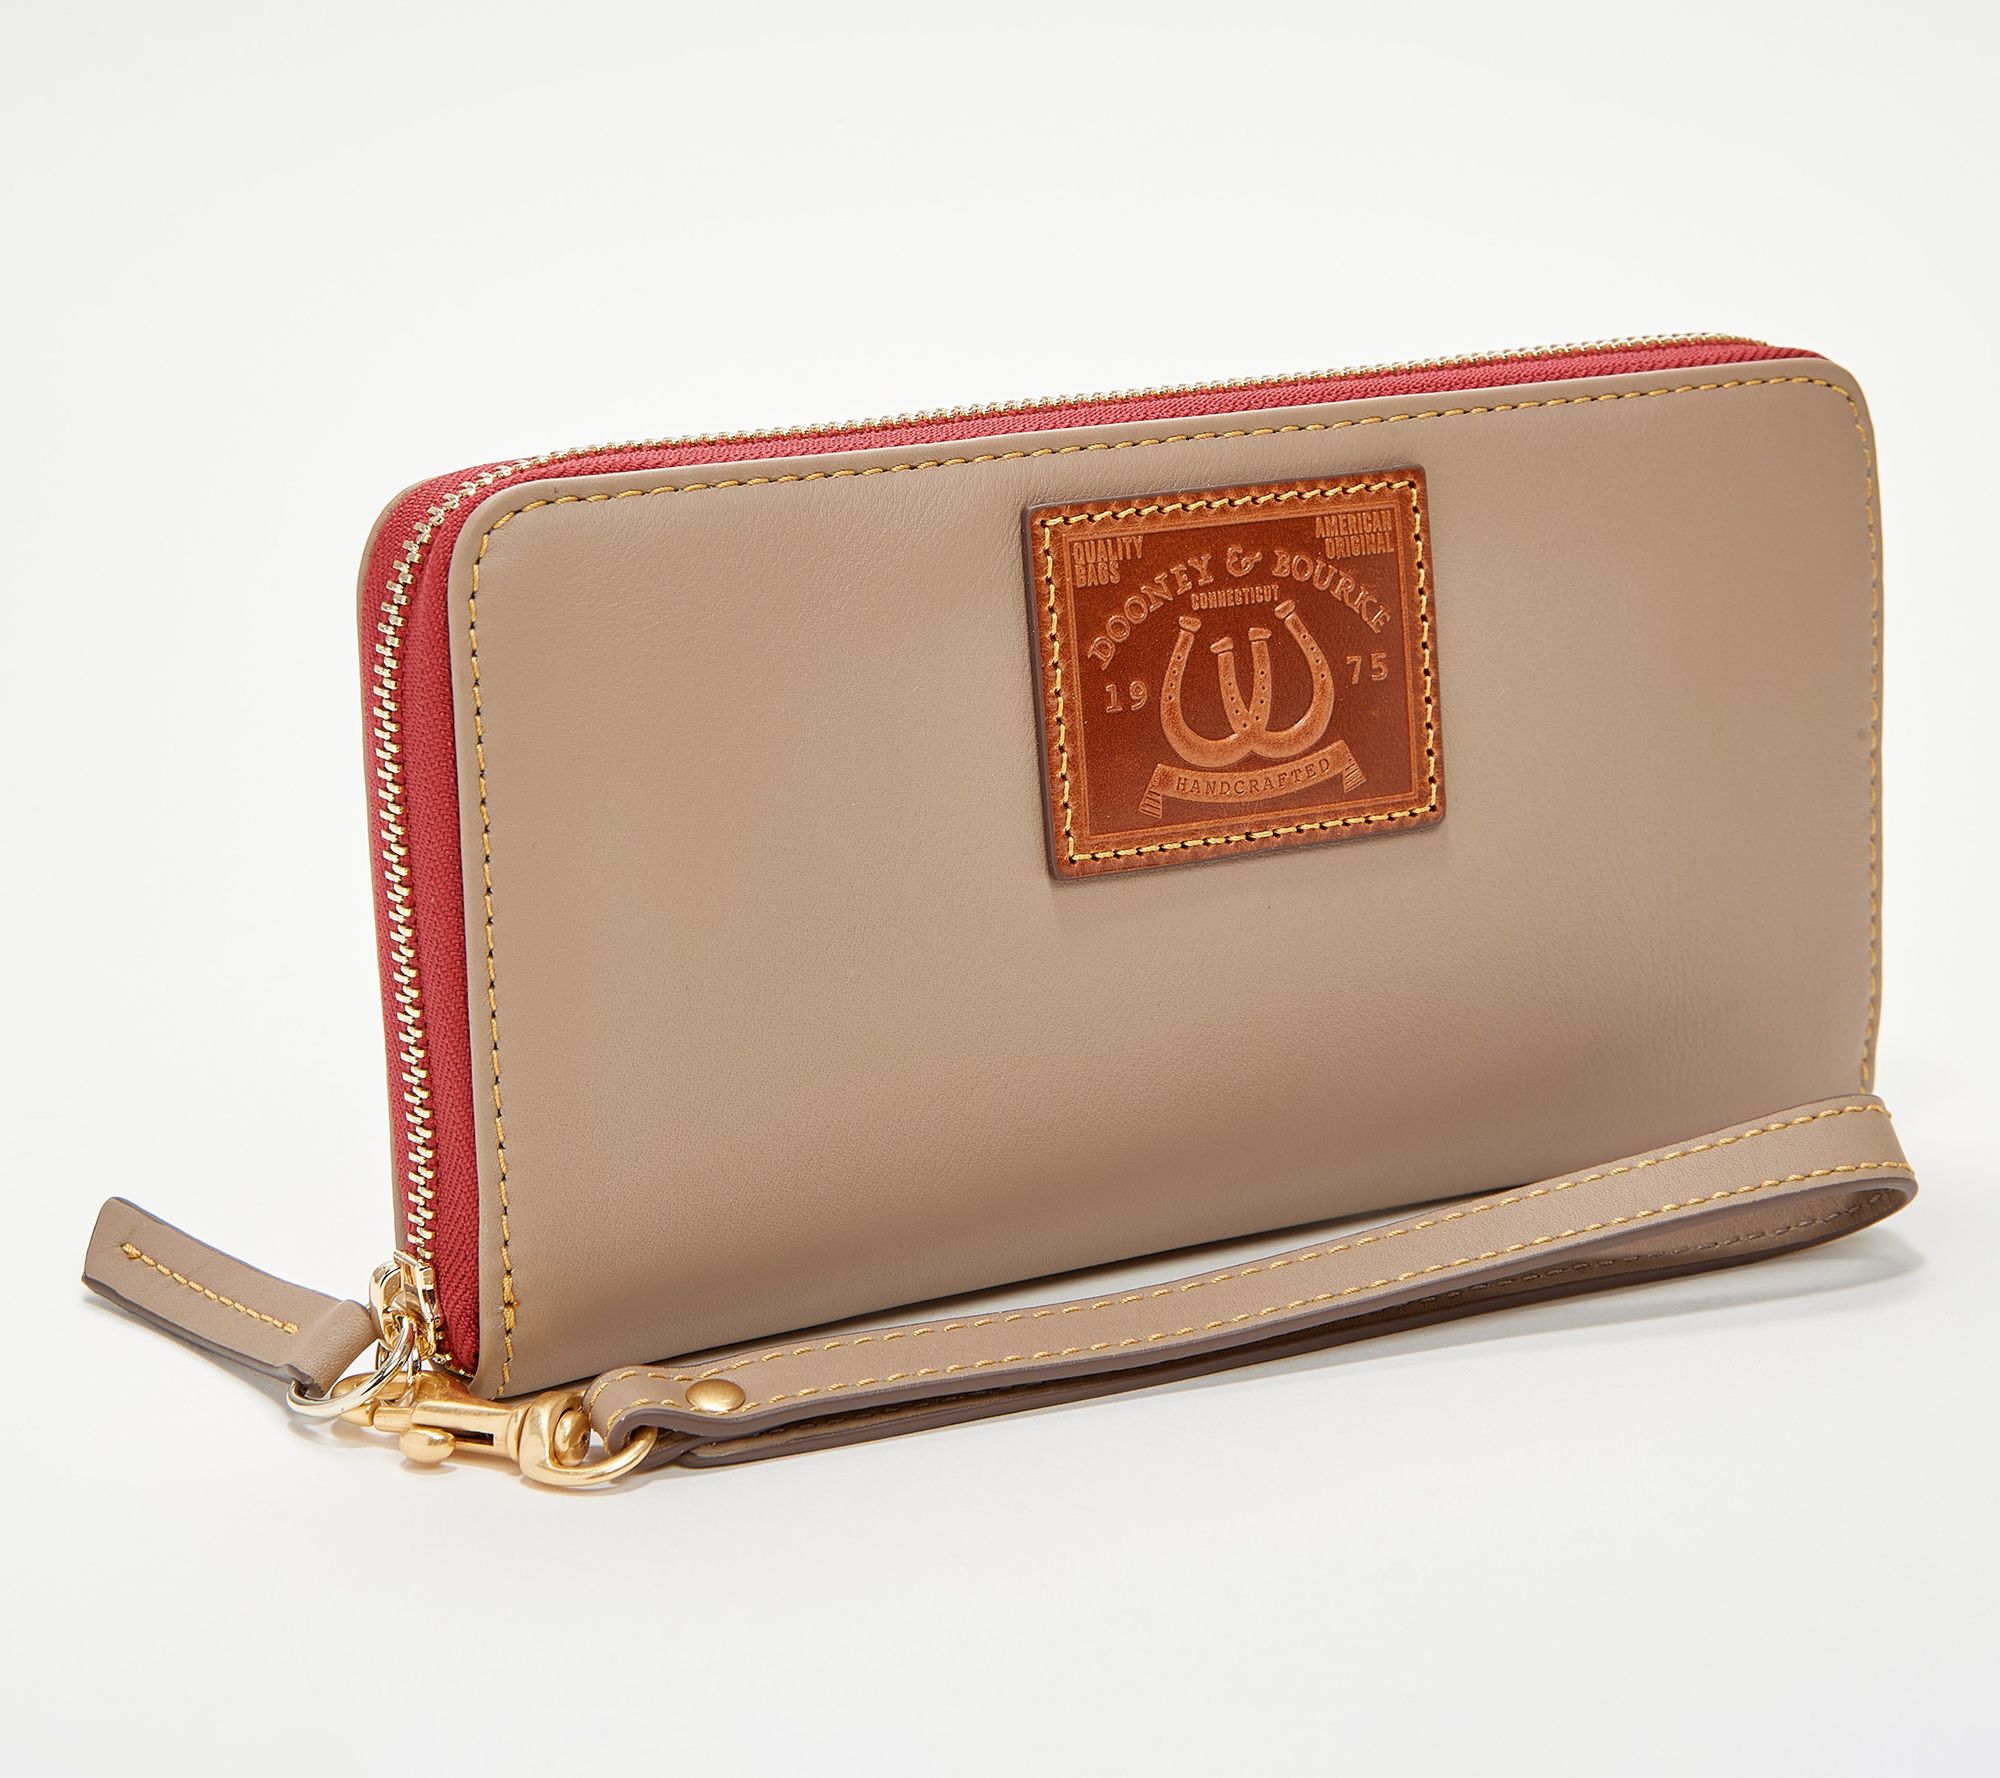 Sold at Auction: Dooney & Bourke Wallet And Small Purse